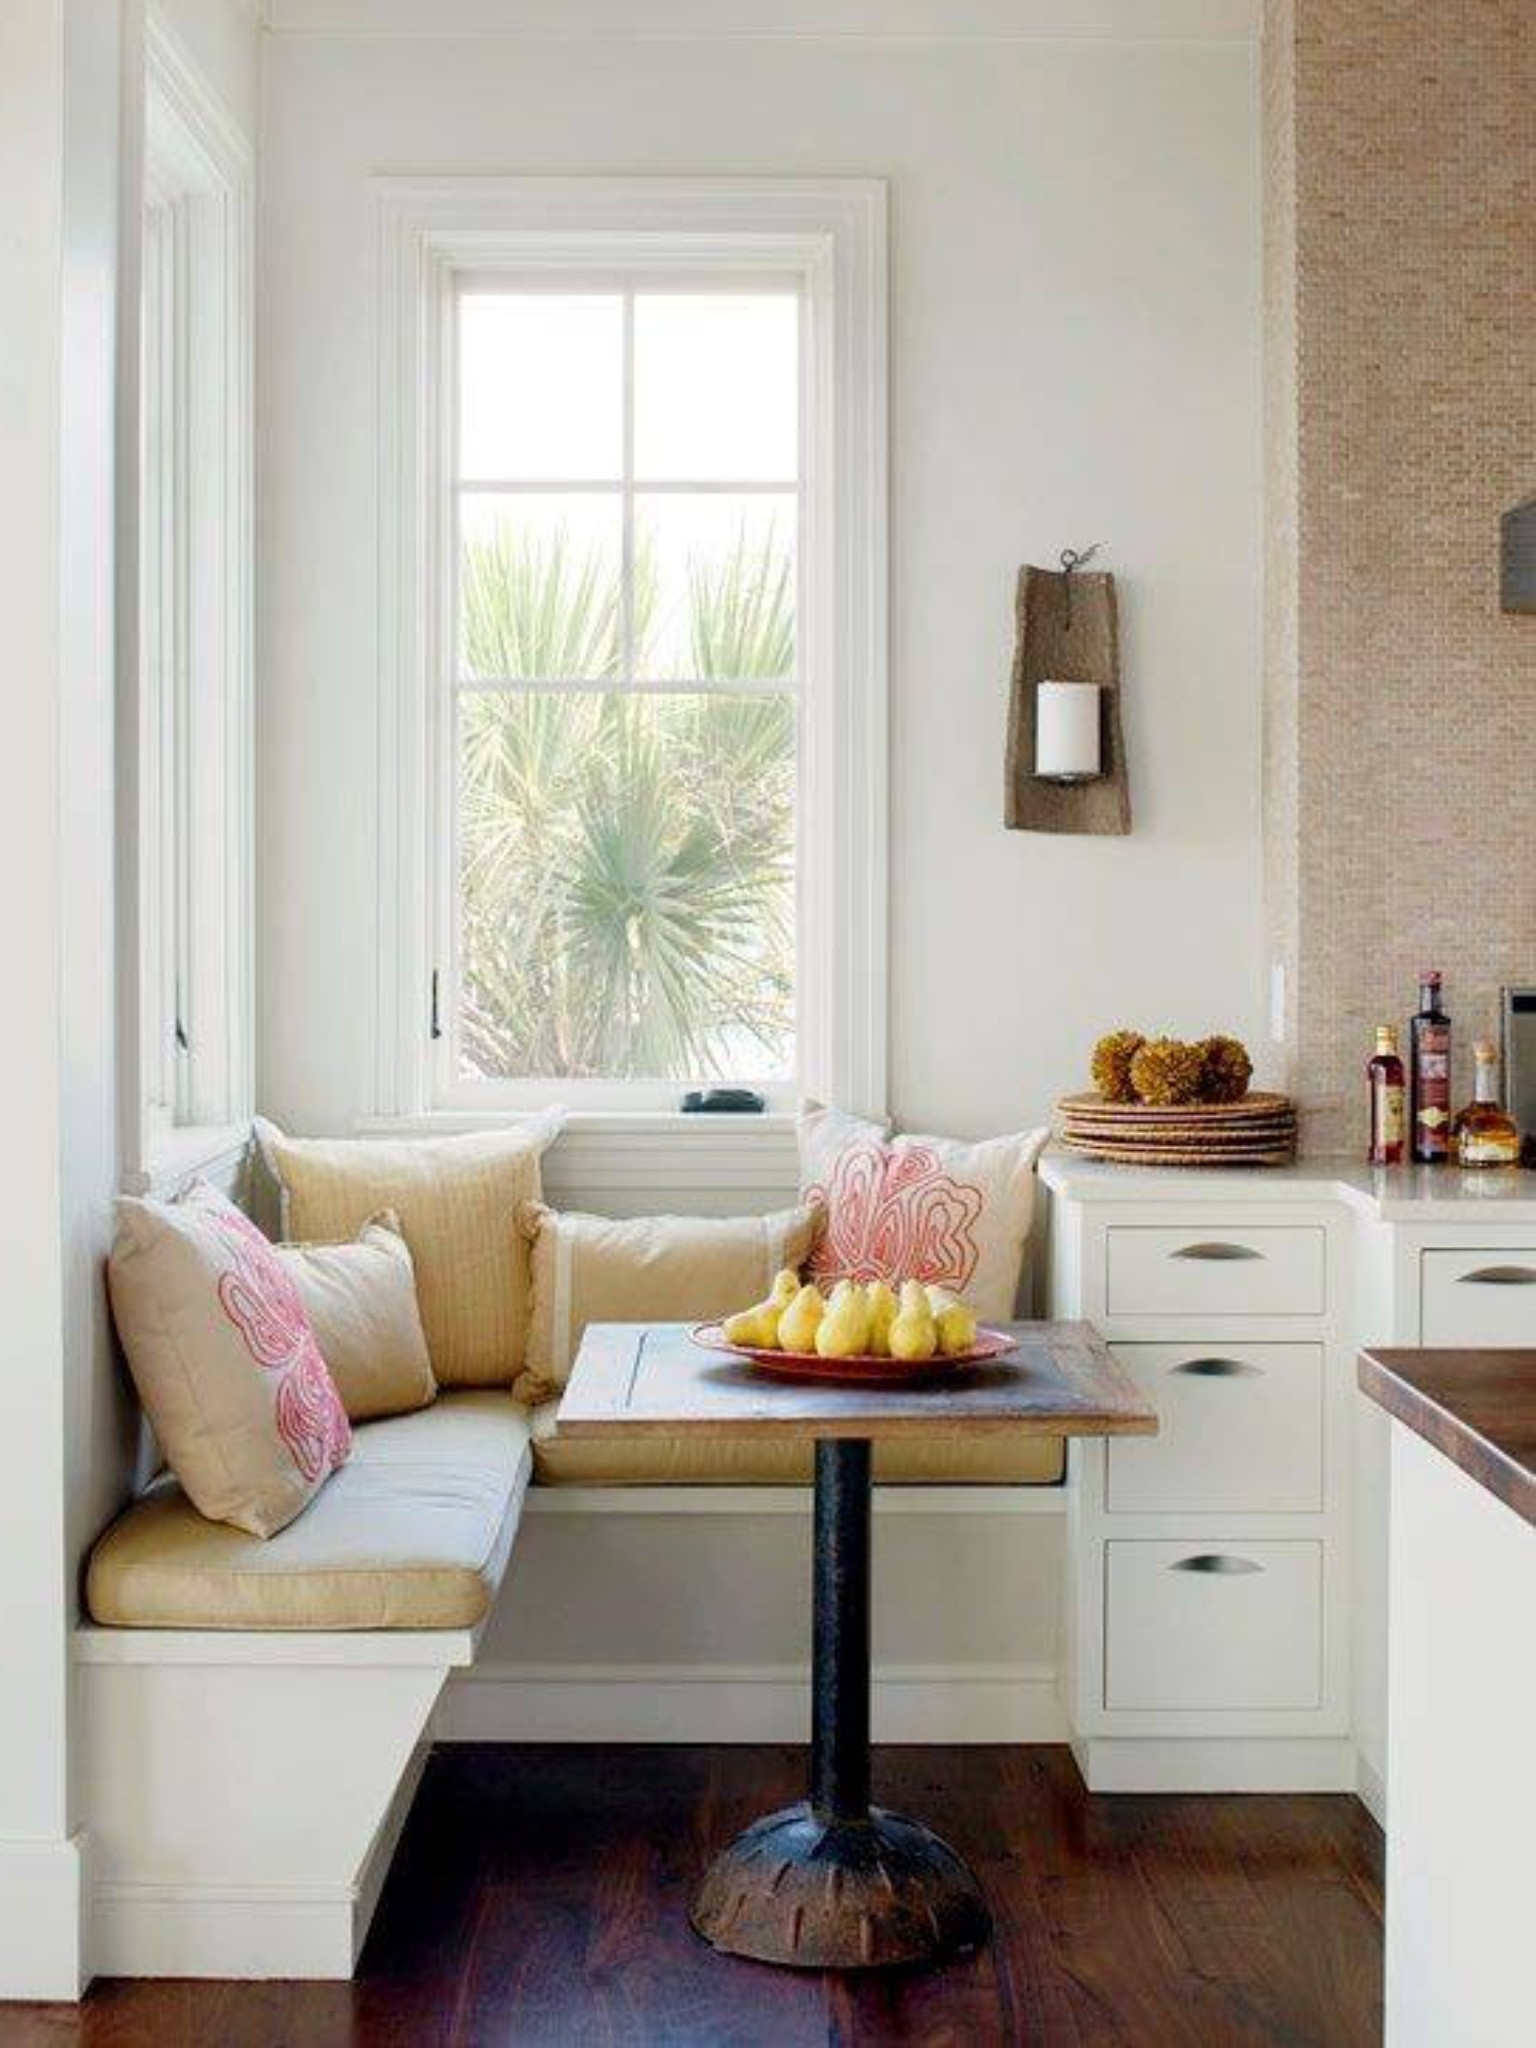 Planning to Install a Breakfast Nook in Your Kitchen - Kitchen Solvers